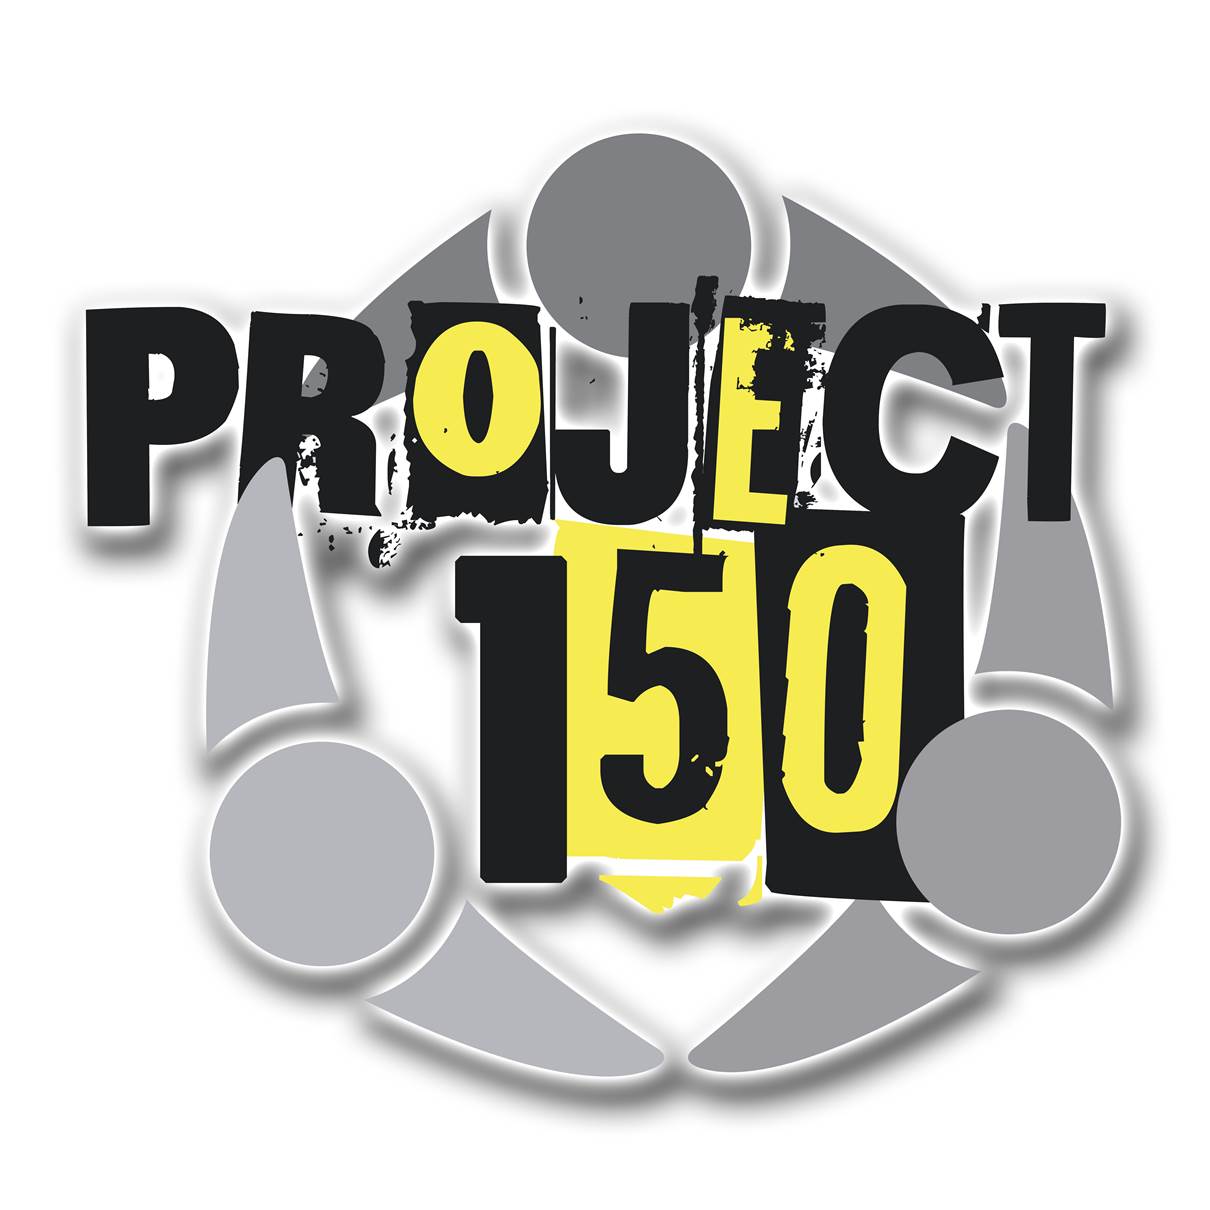 The Youth Council for Project 150 is offering several scholarships to attend a Nevada college, university or accredited vocational training institute.